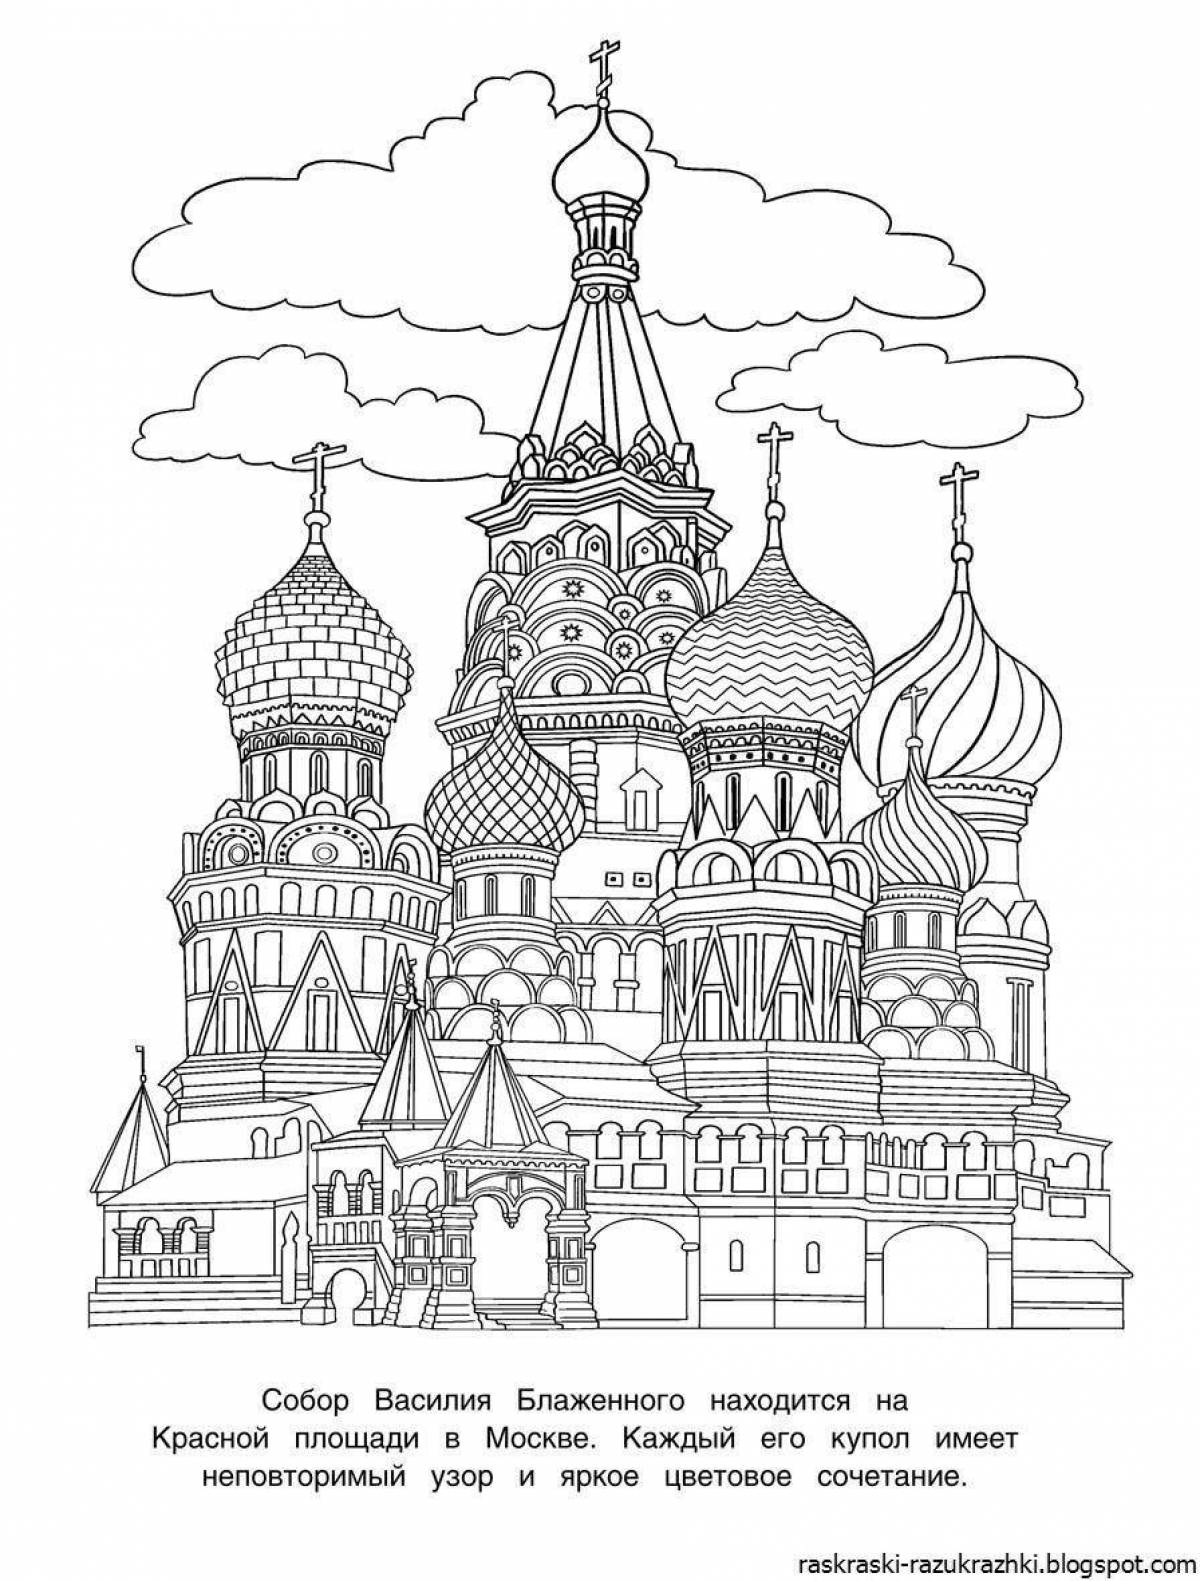 Intriguing Moscow Kremlin coloring book for kids